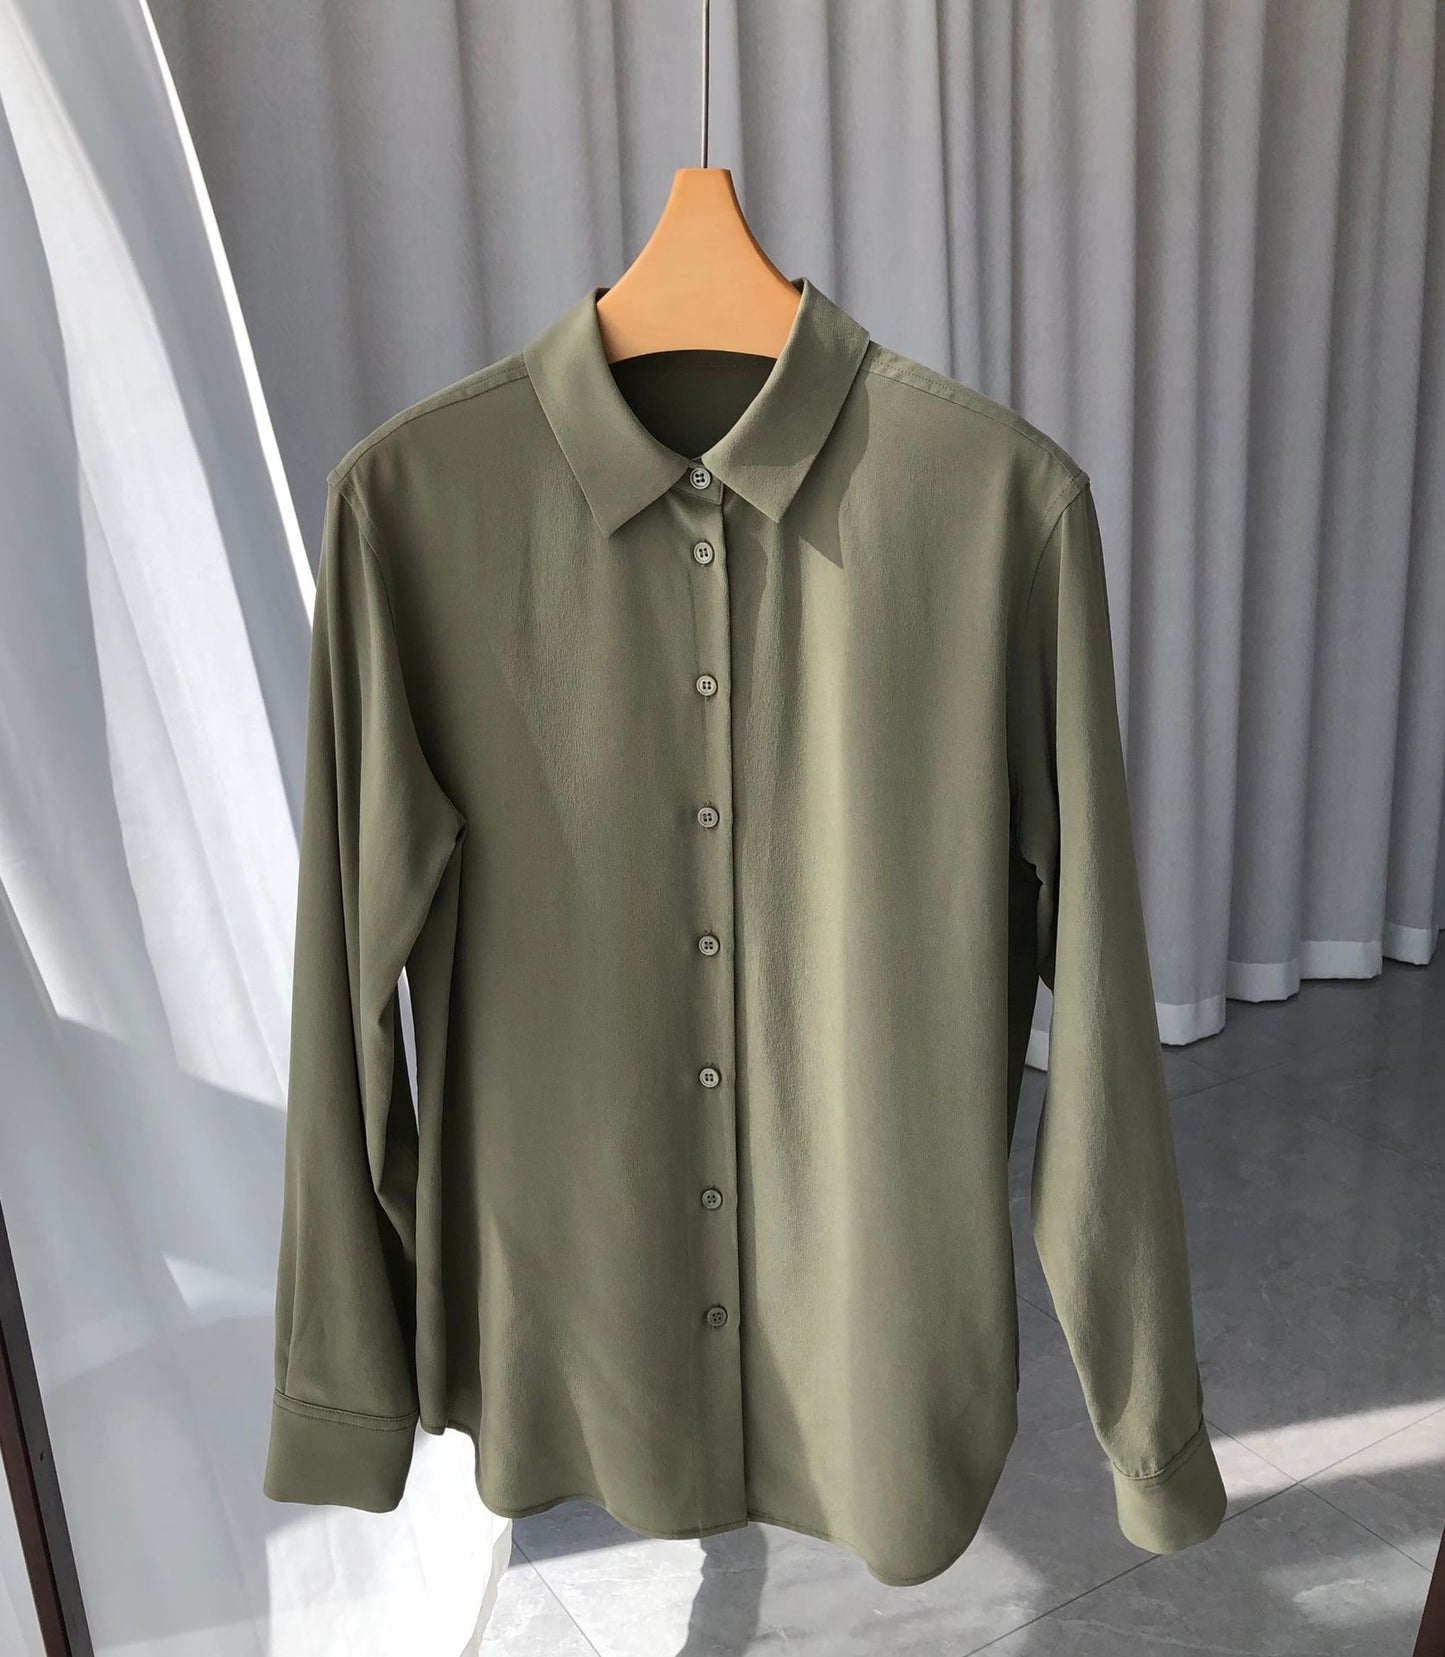 Silk Shirt for Women, Pure Color Simple Long-Sleeved Tops for Ladies (No Pocket)